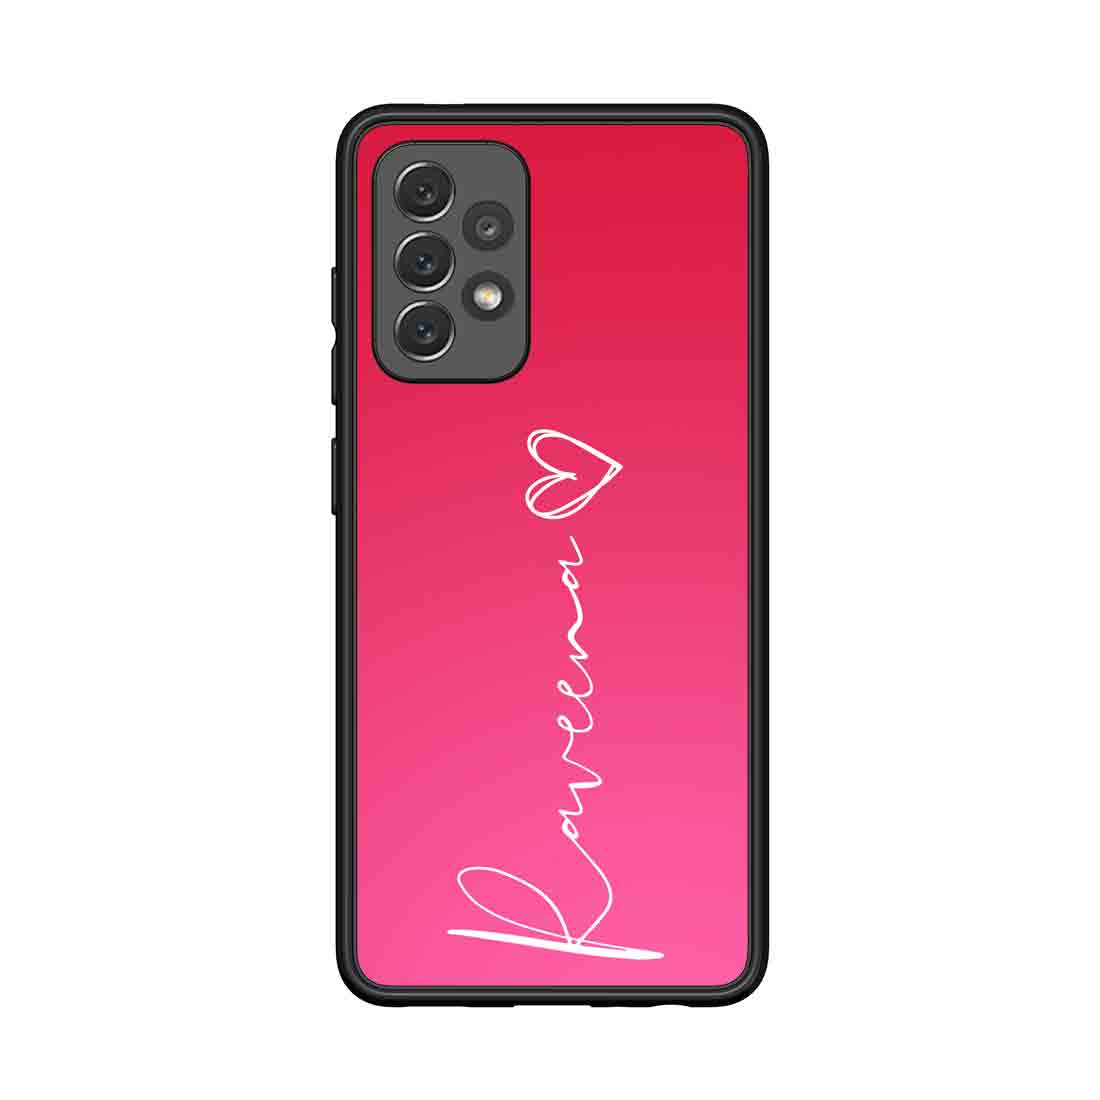 Personalized Samsung Galaxy A72 Cover Designer with Signature